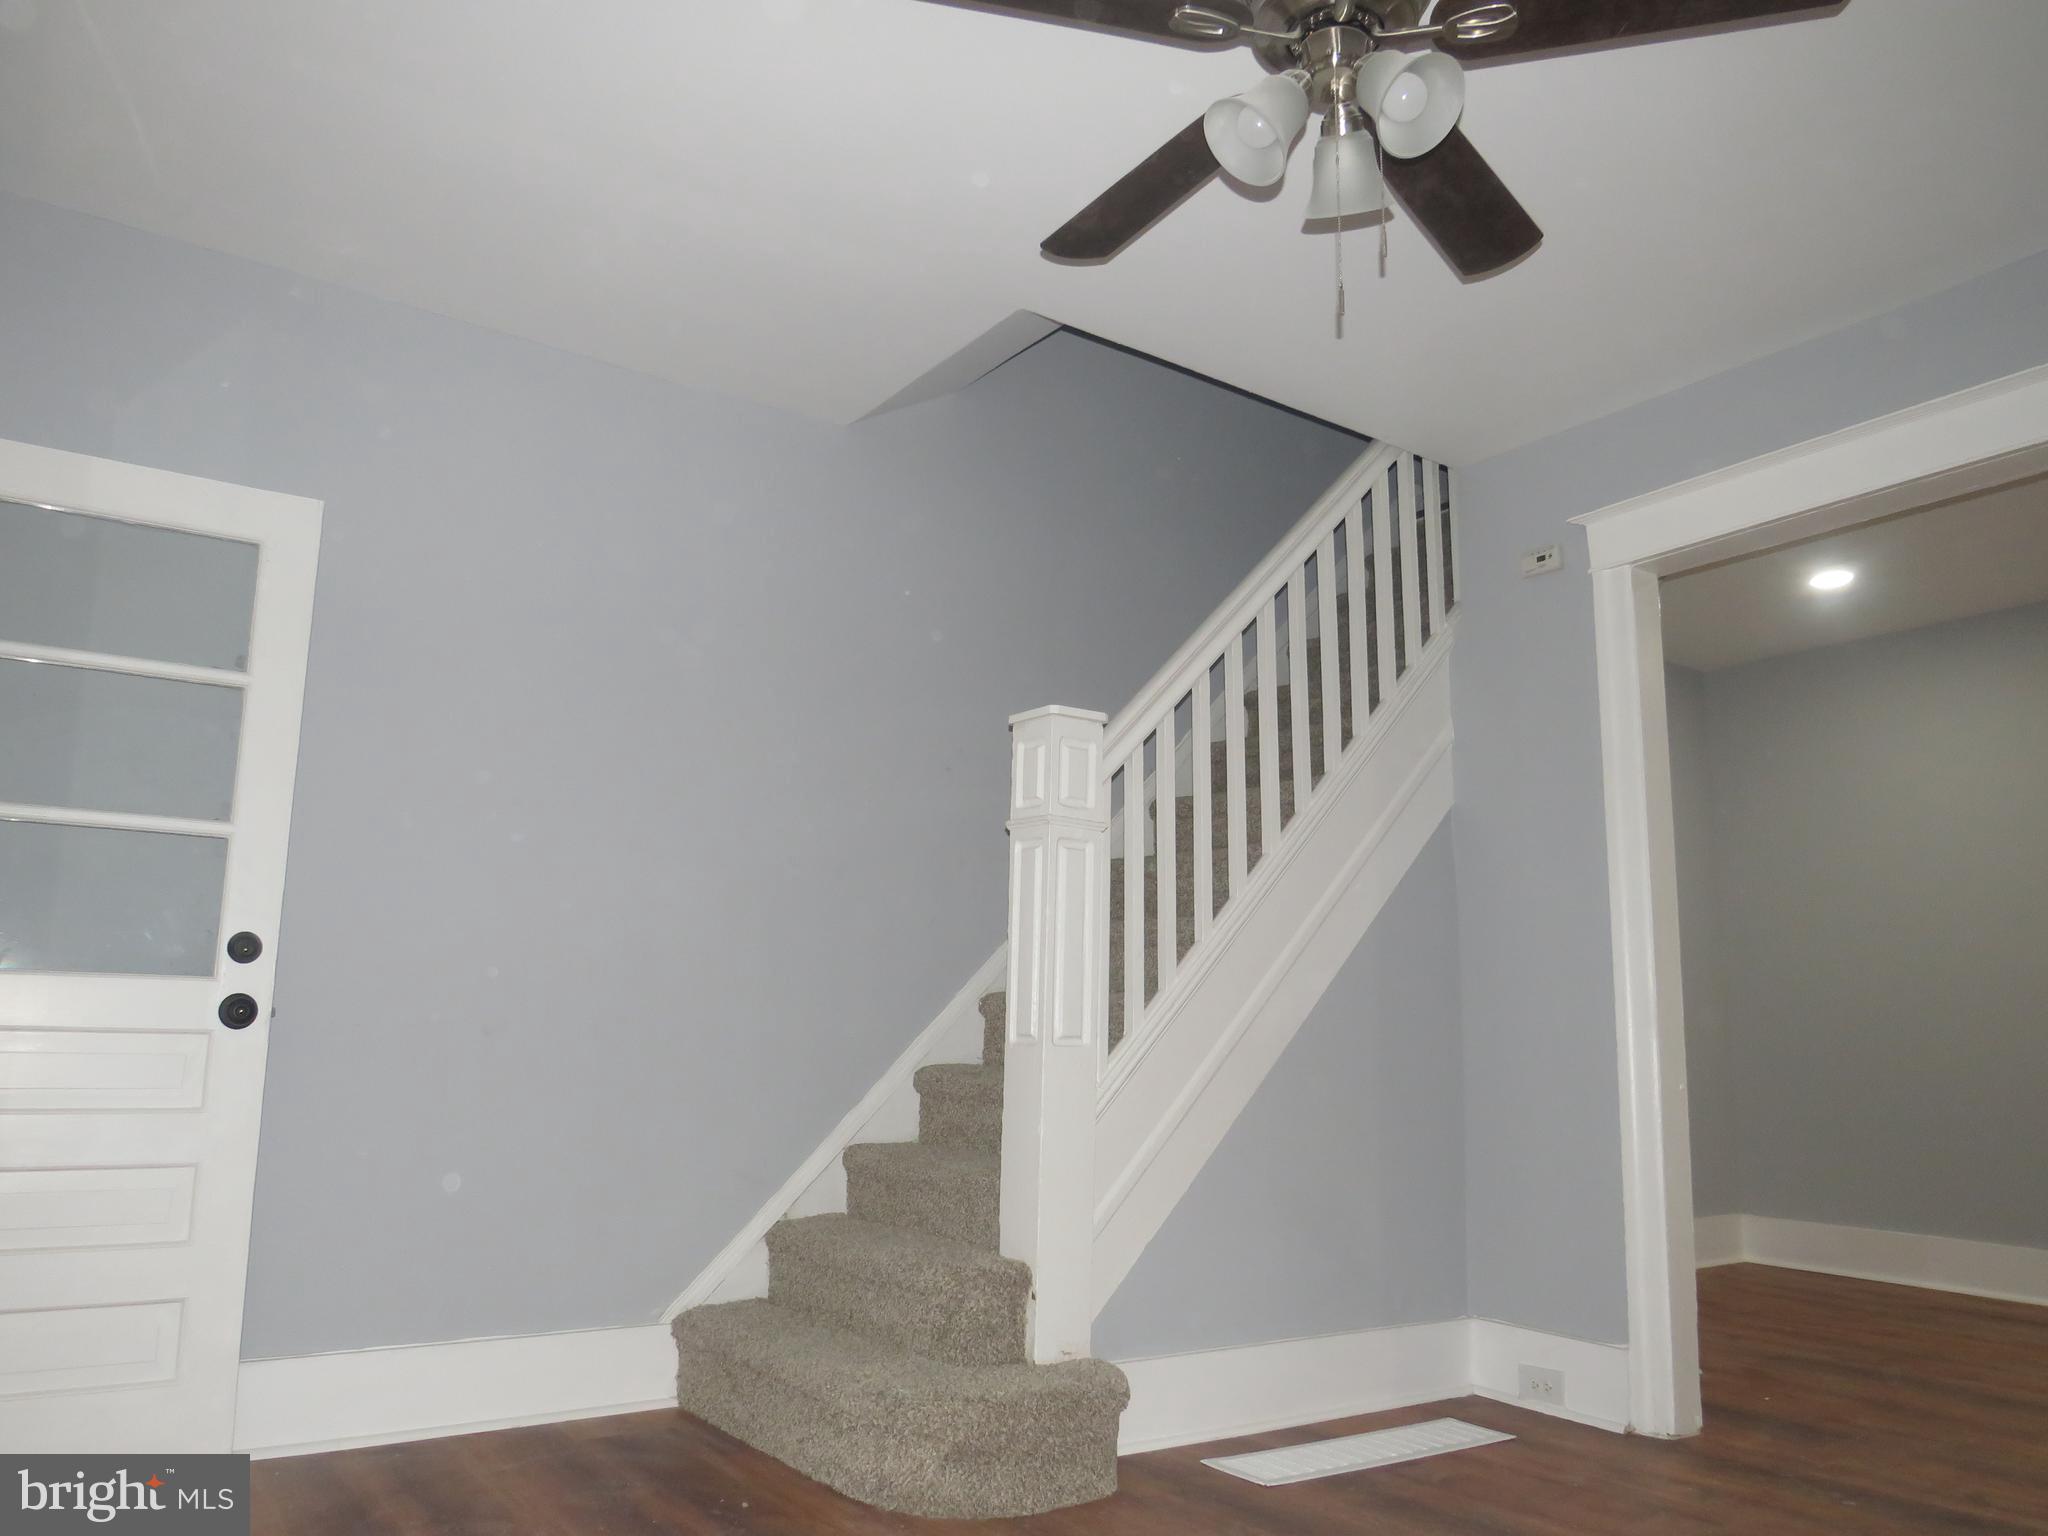 a view of staircase with white walls and railing